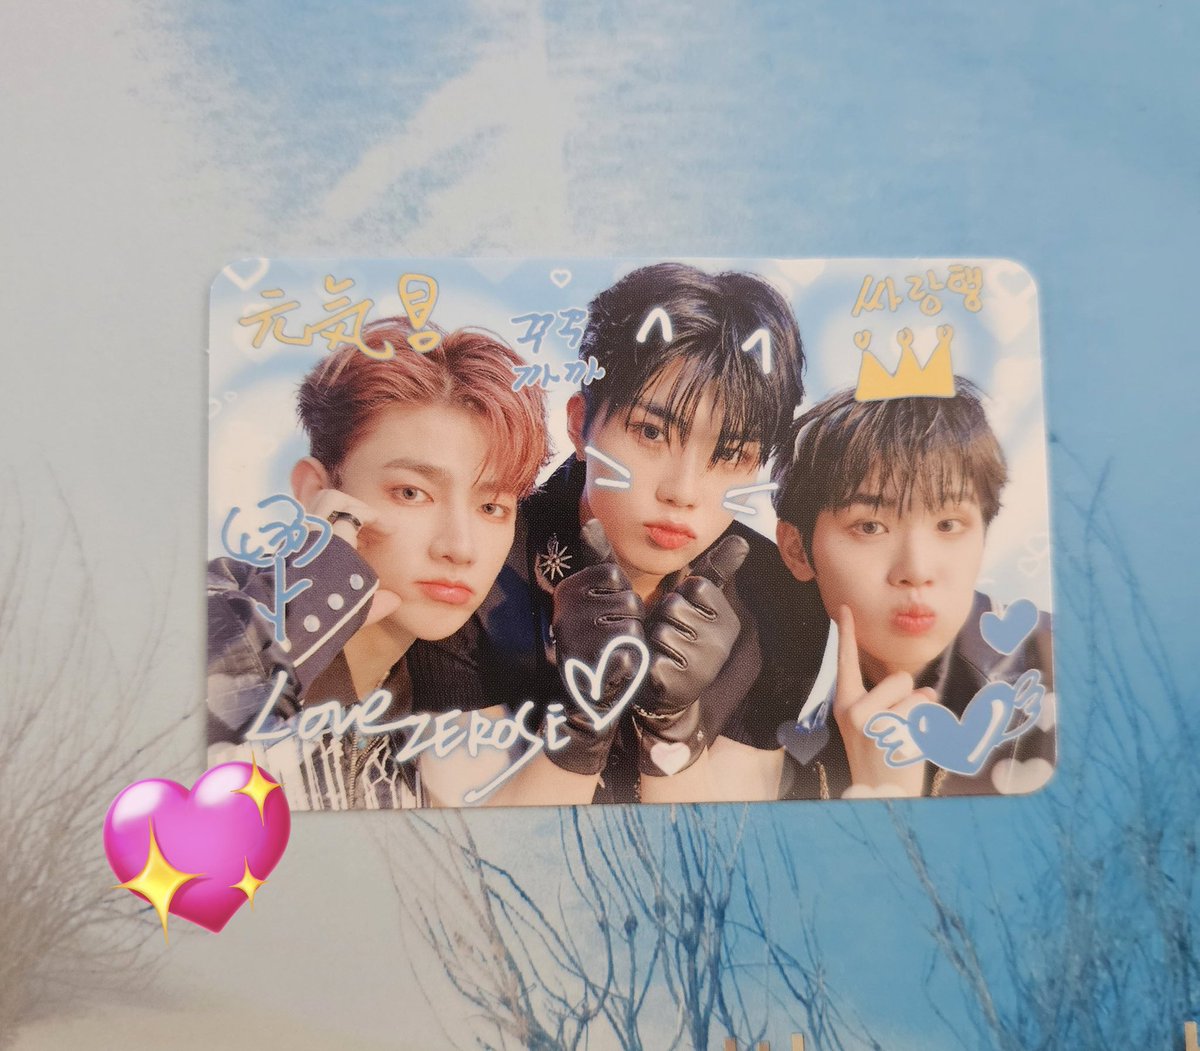 A GUNHAORAE PC PLEASE THIS NOT A WANT THIS IS A NEED